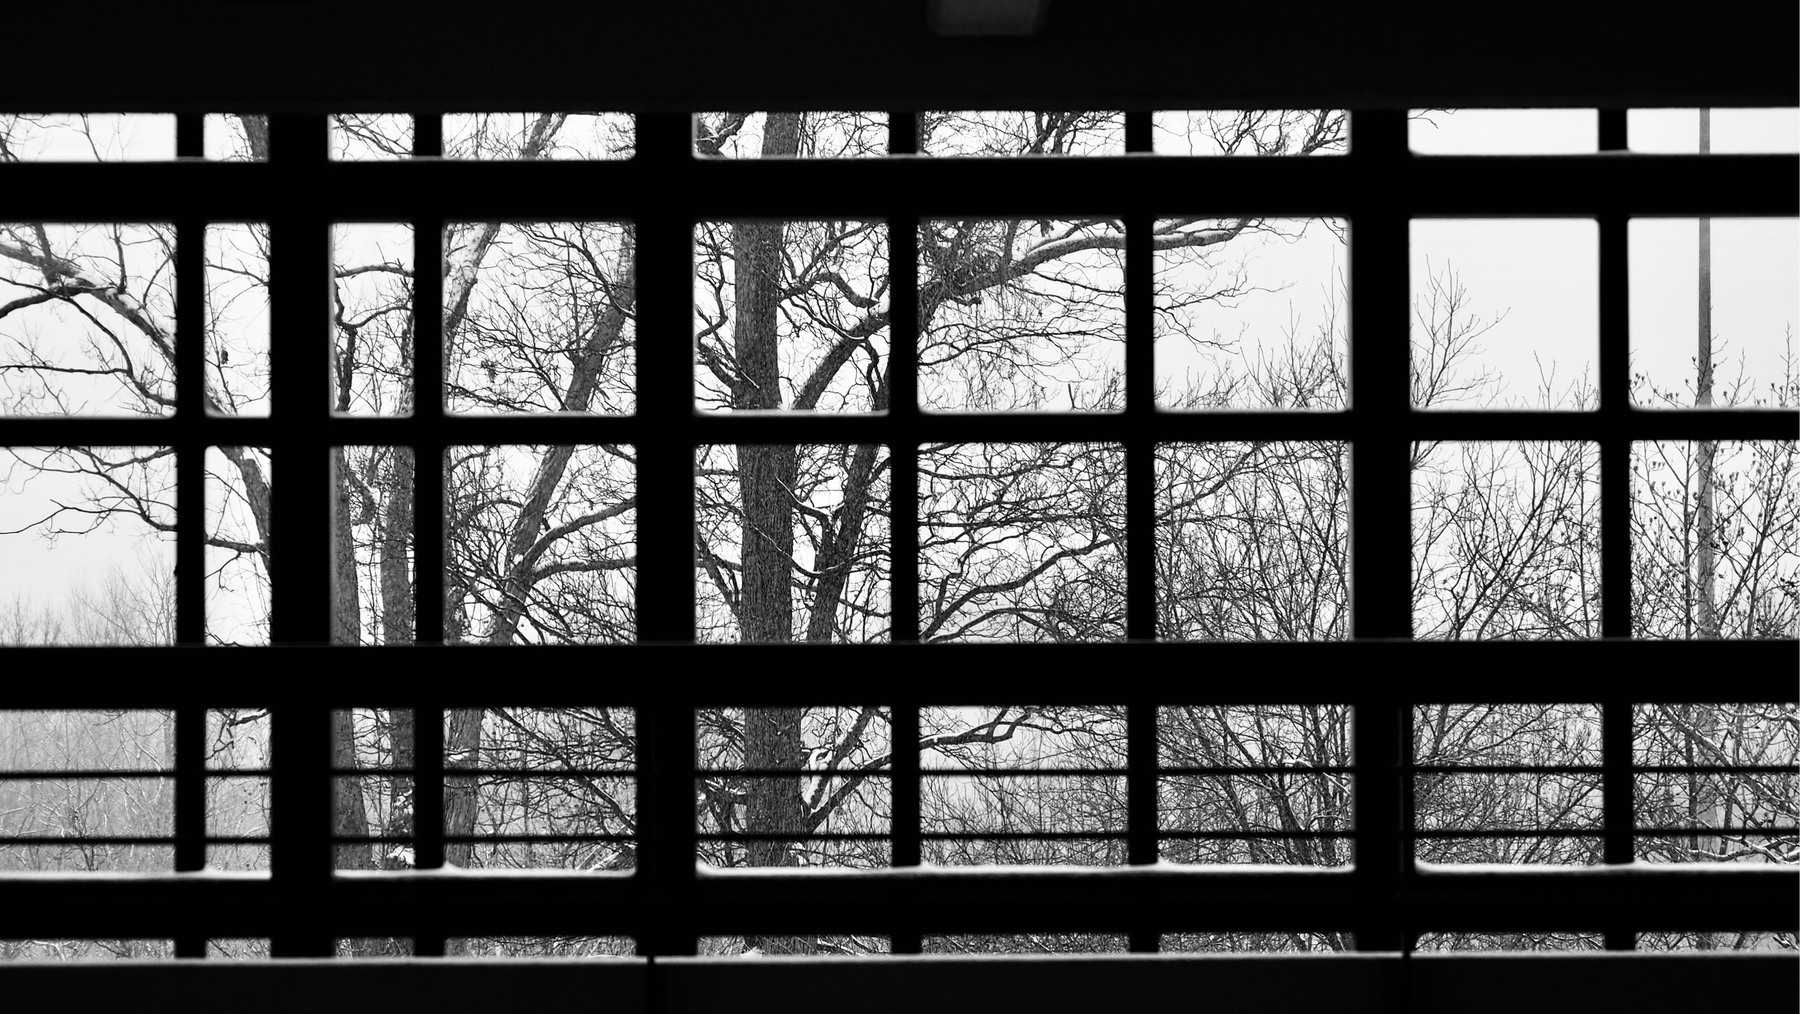 Square windows of metal with trees and snow visible through them